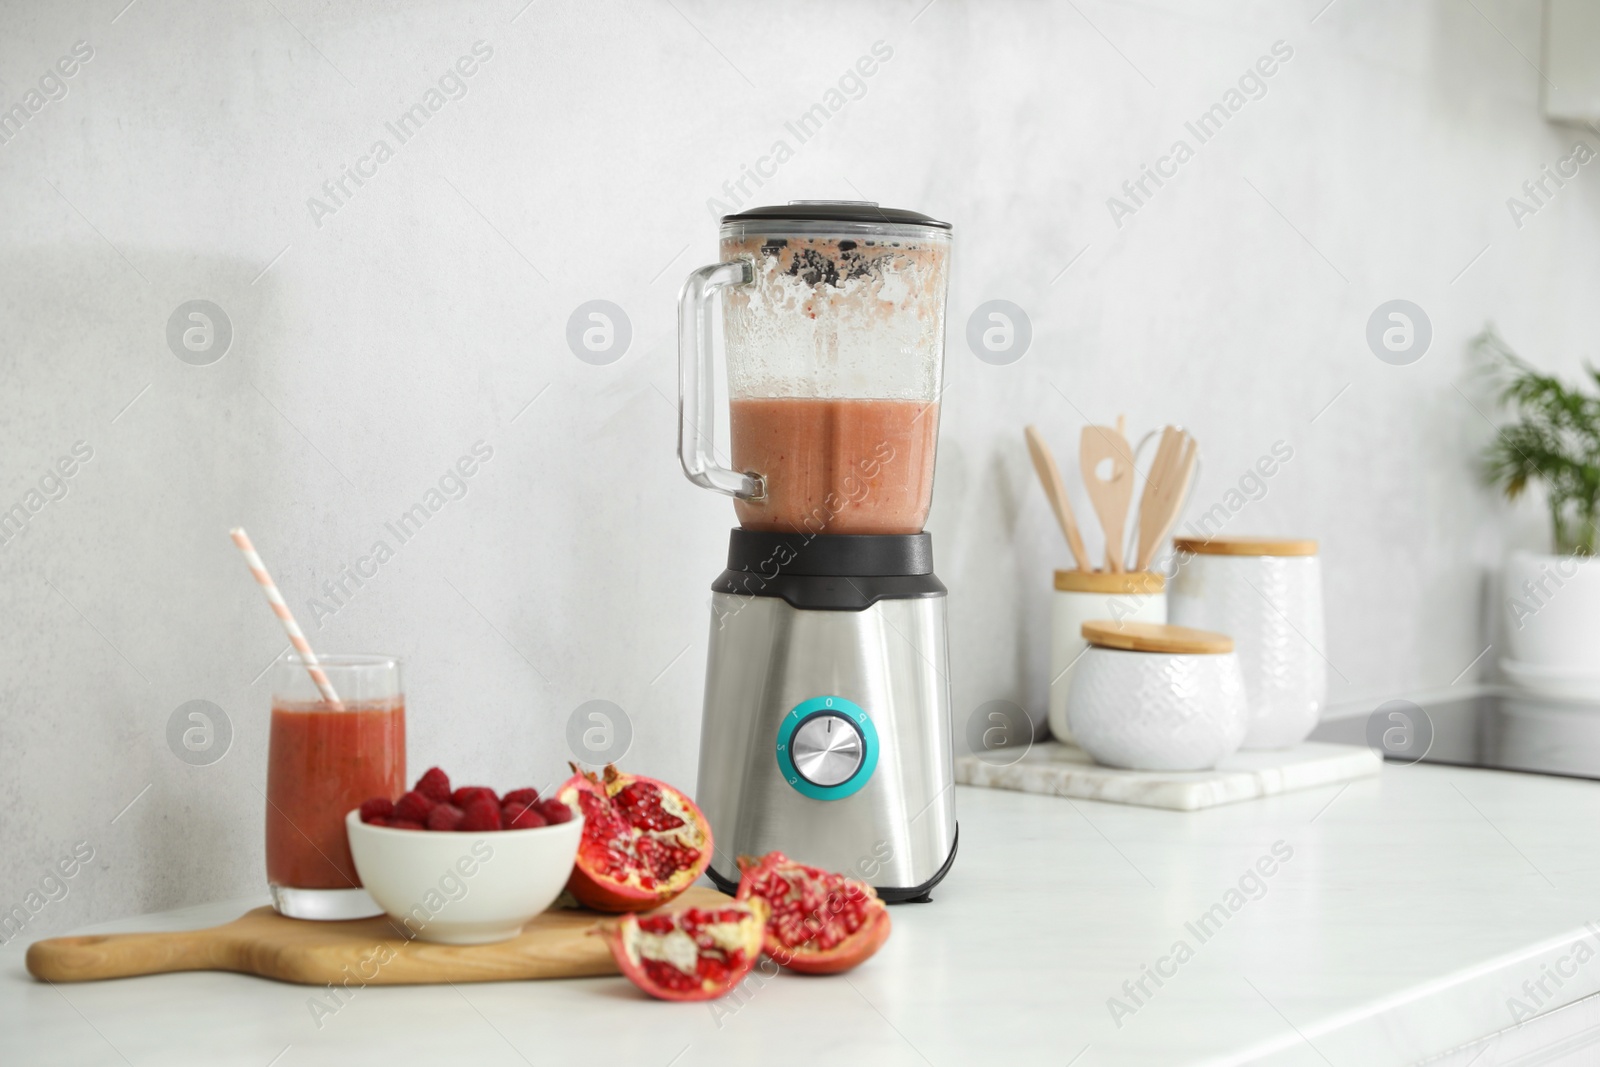 Photo of Blender and smoothie ingredients on white countertop in kitchen